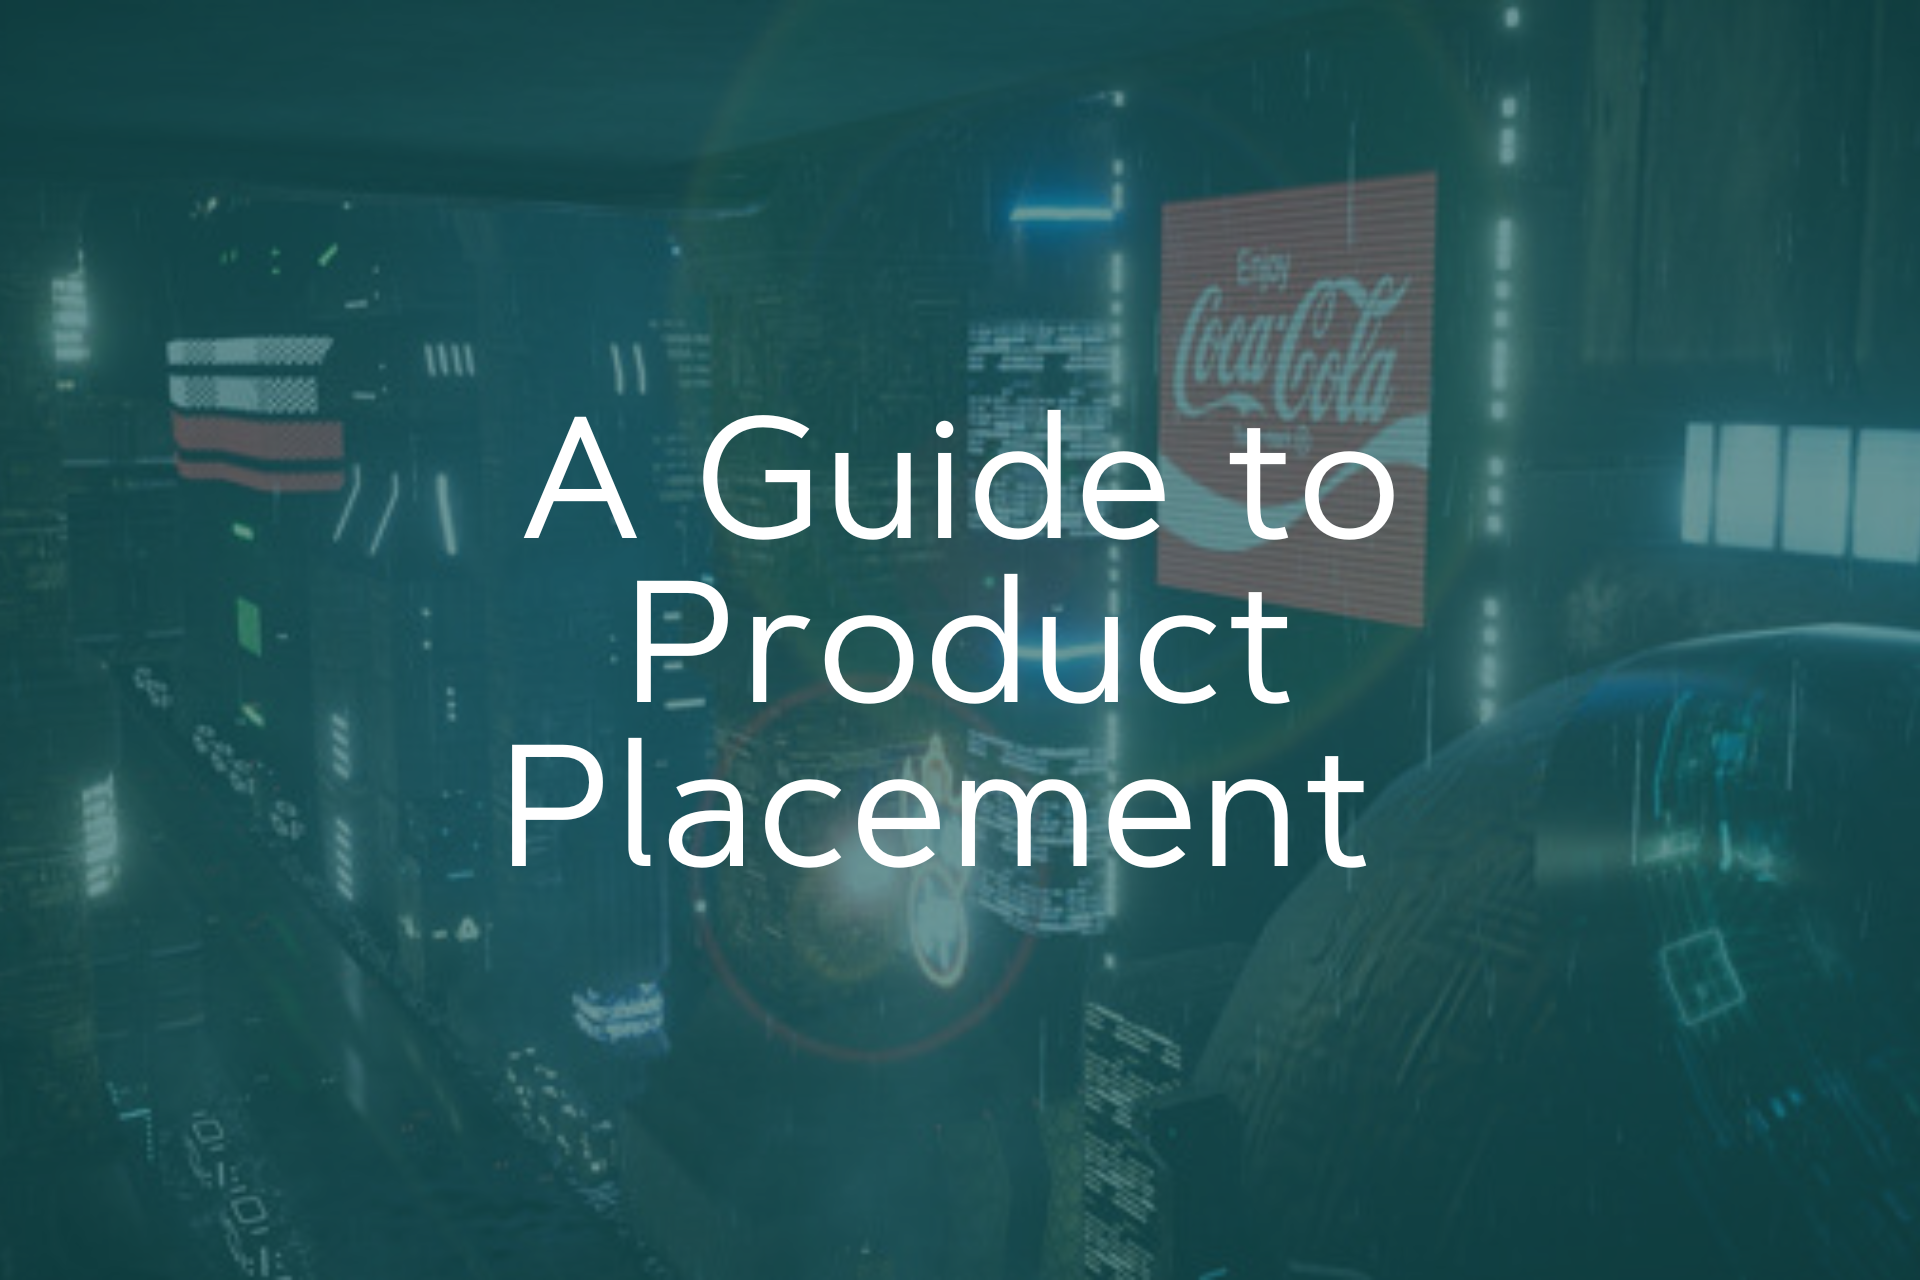 A Guide to Product Placement